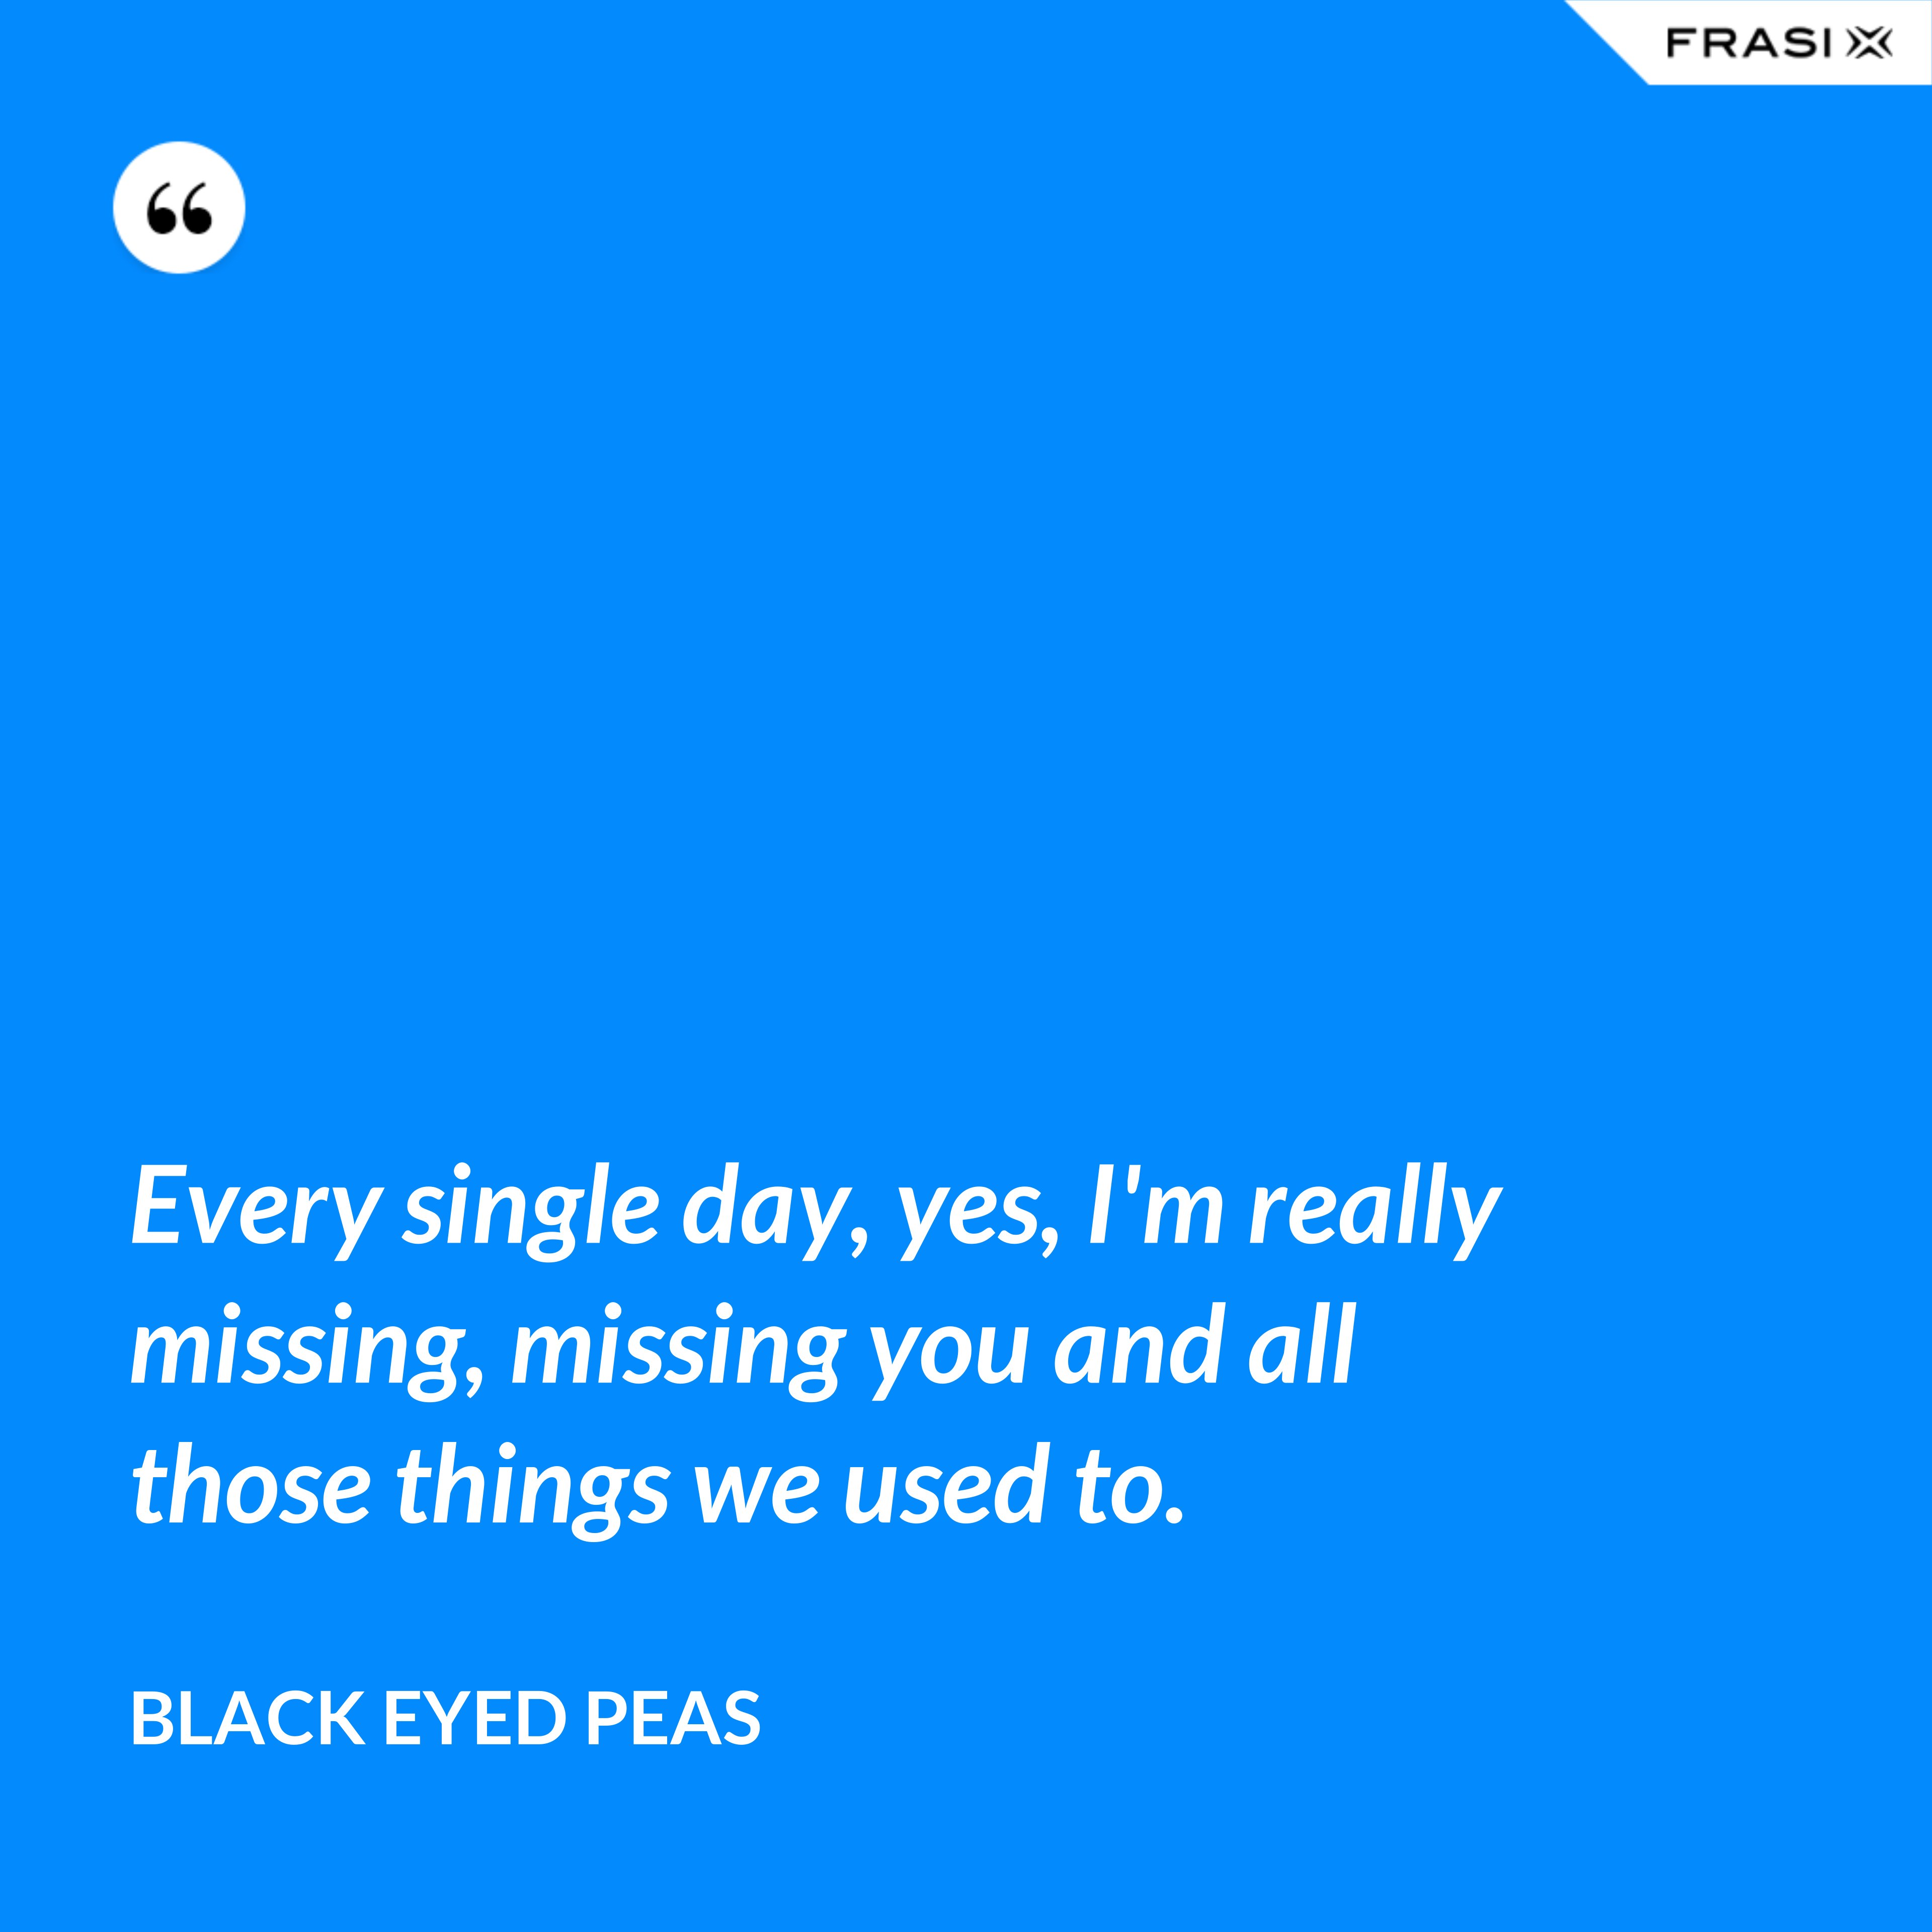 Every single day, yes, I'm really missing, missing you and all those things we used to. - Black Eyed Peas